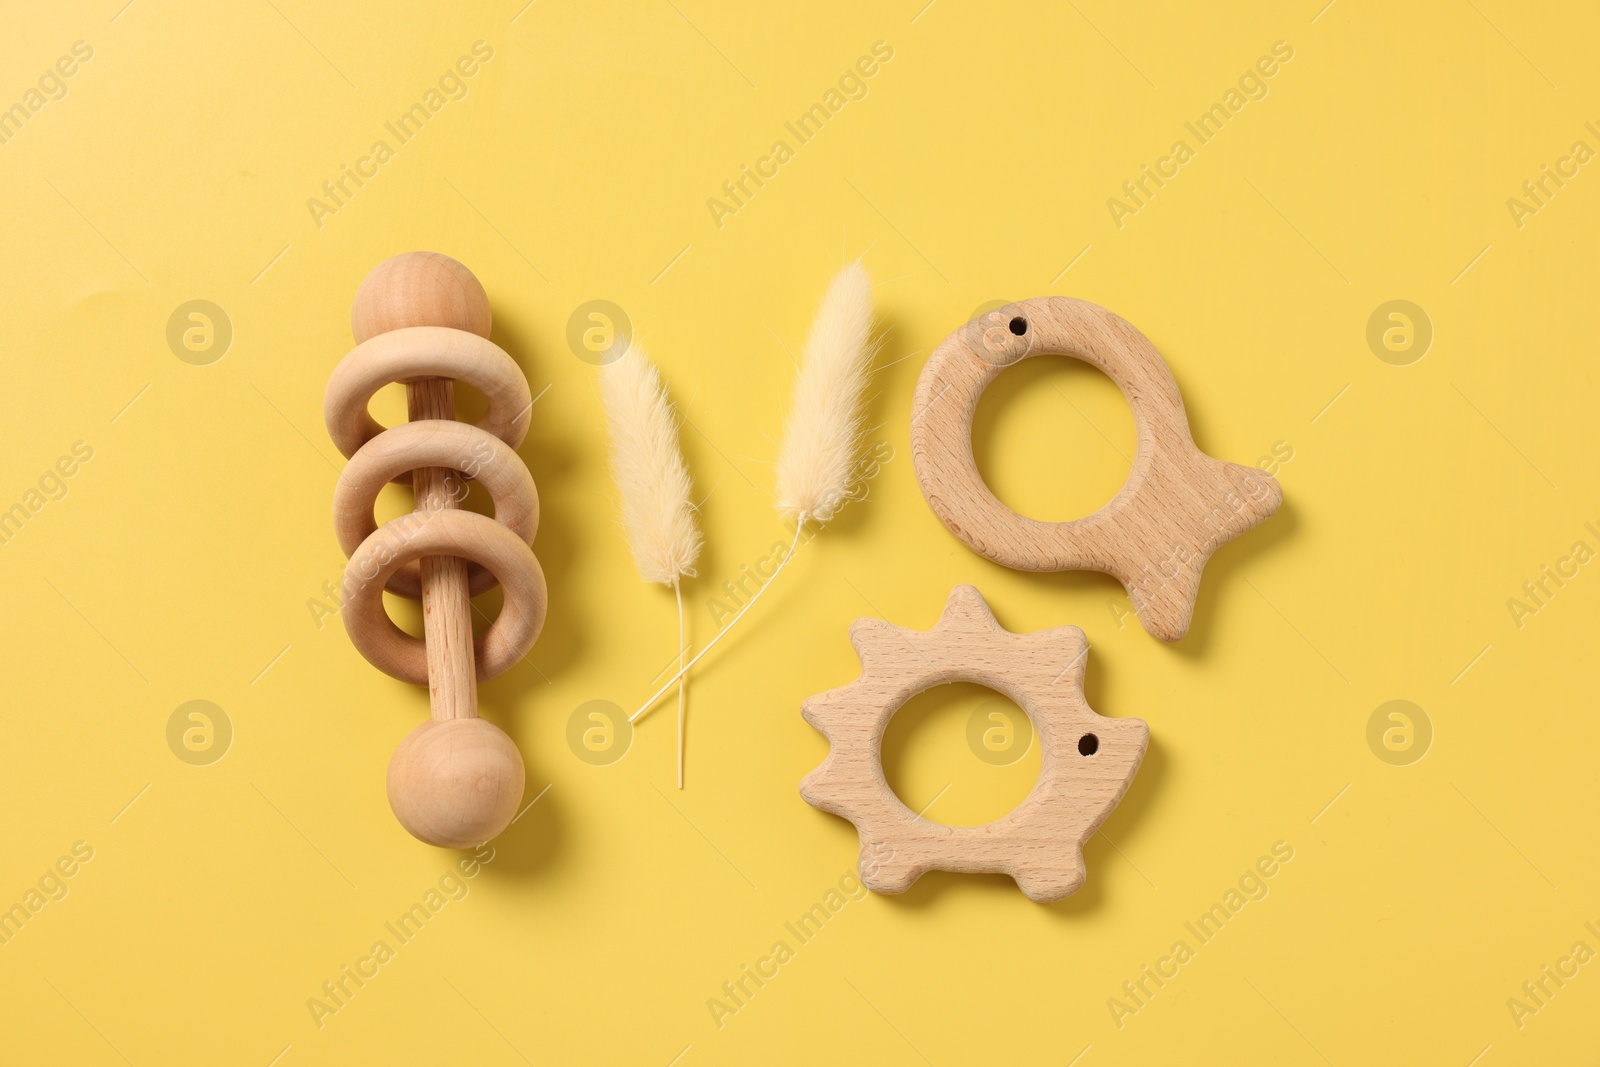 Photo of Baby accessories. Wooden rattle, teethers and dry spikes on yellow background, flat lay